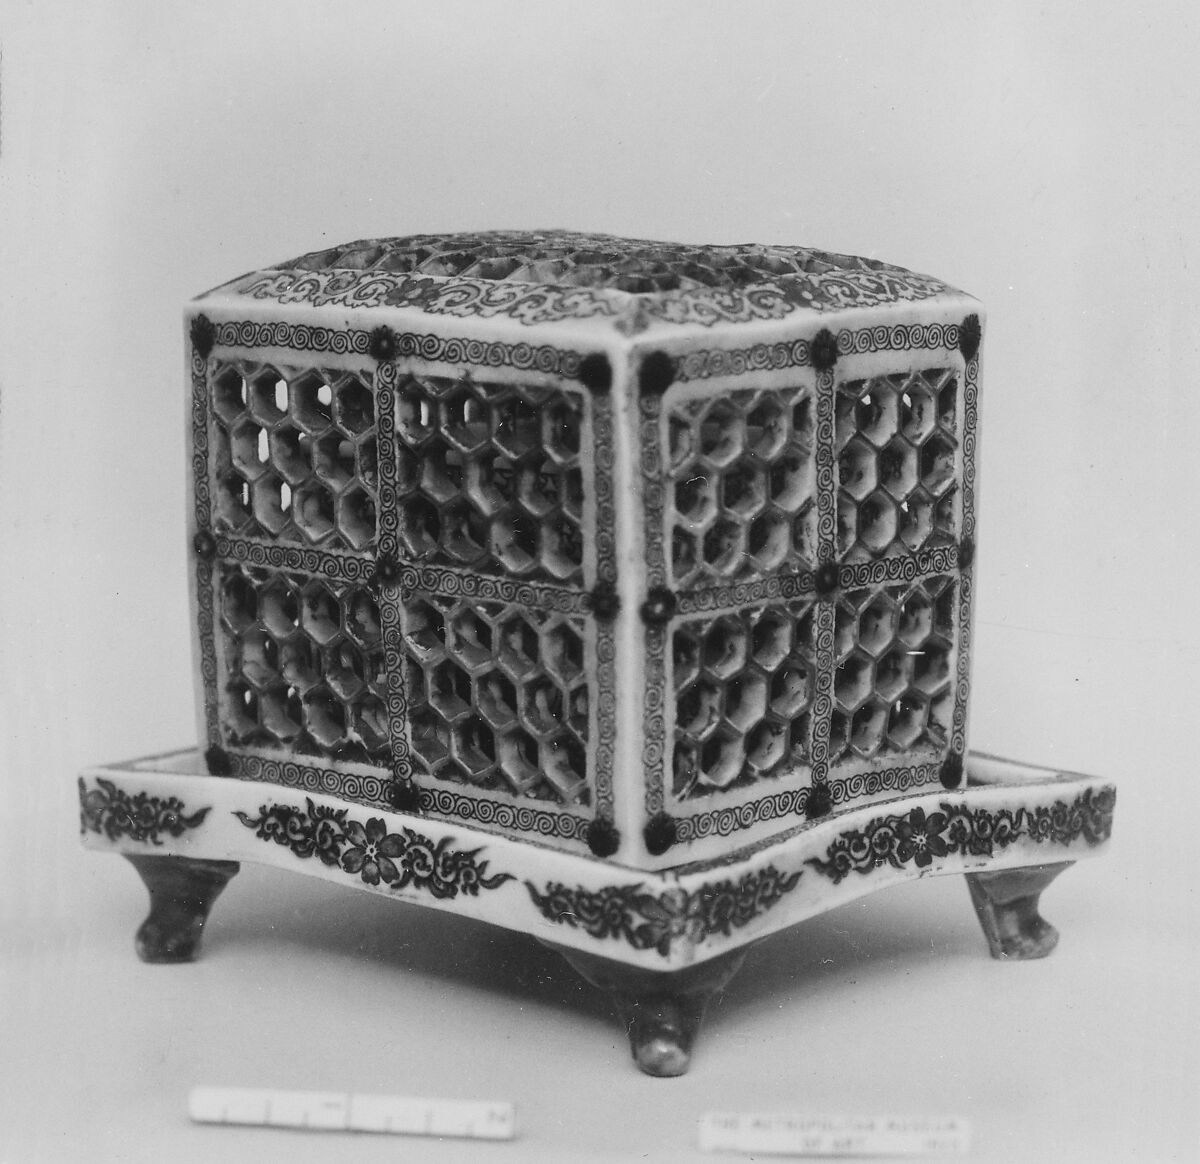 Censer with Pierced Design, White porcelain decorated with enamels; cover pierced (Hizen ware, Kutani type), Japan 